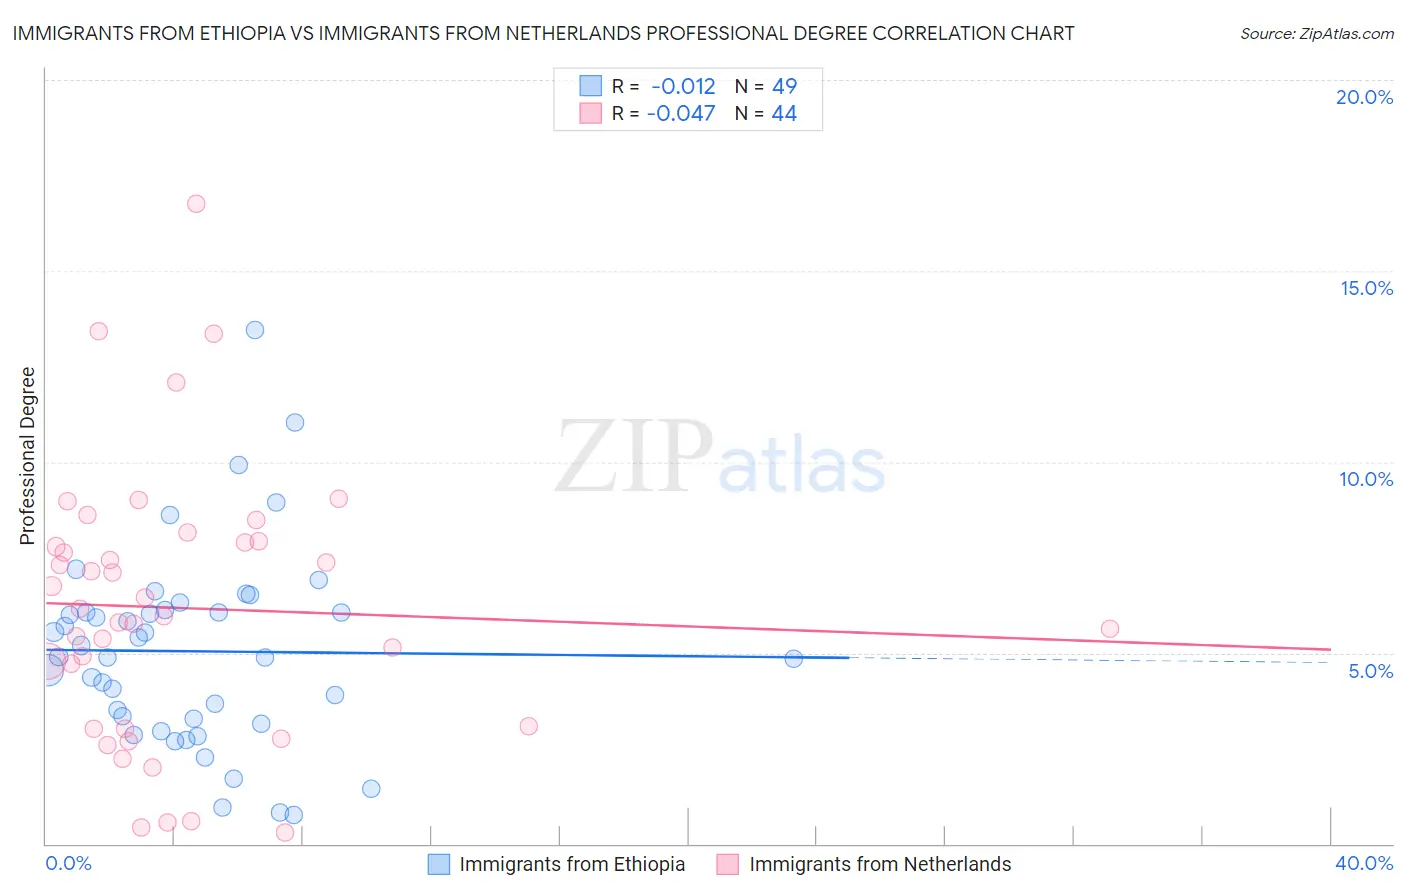 Immigrants from Ethiopia vs Immigrants from Netherlands Professional Degree